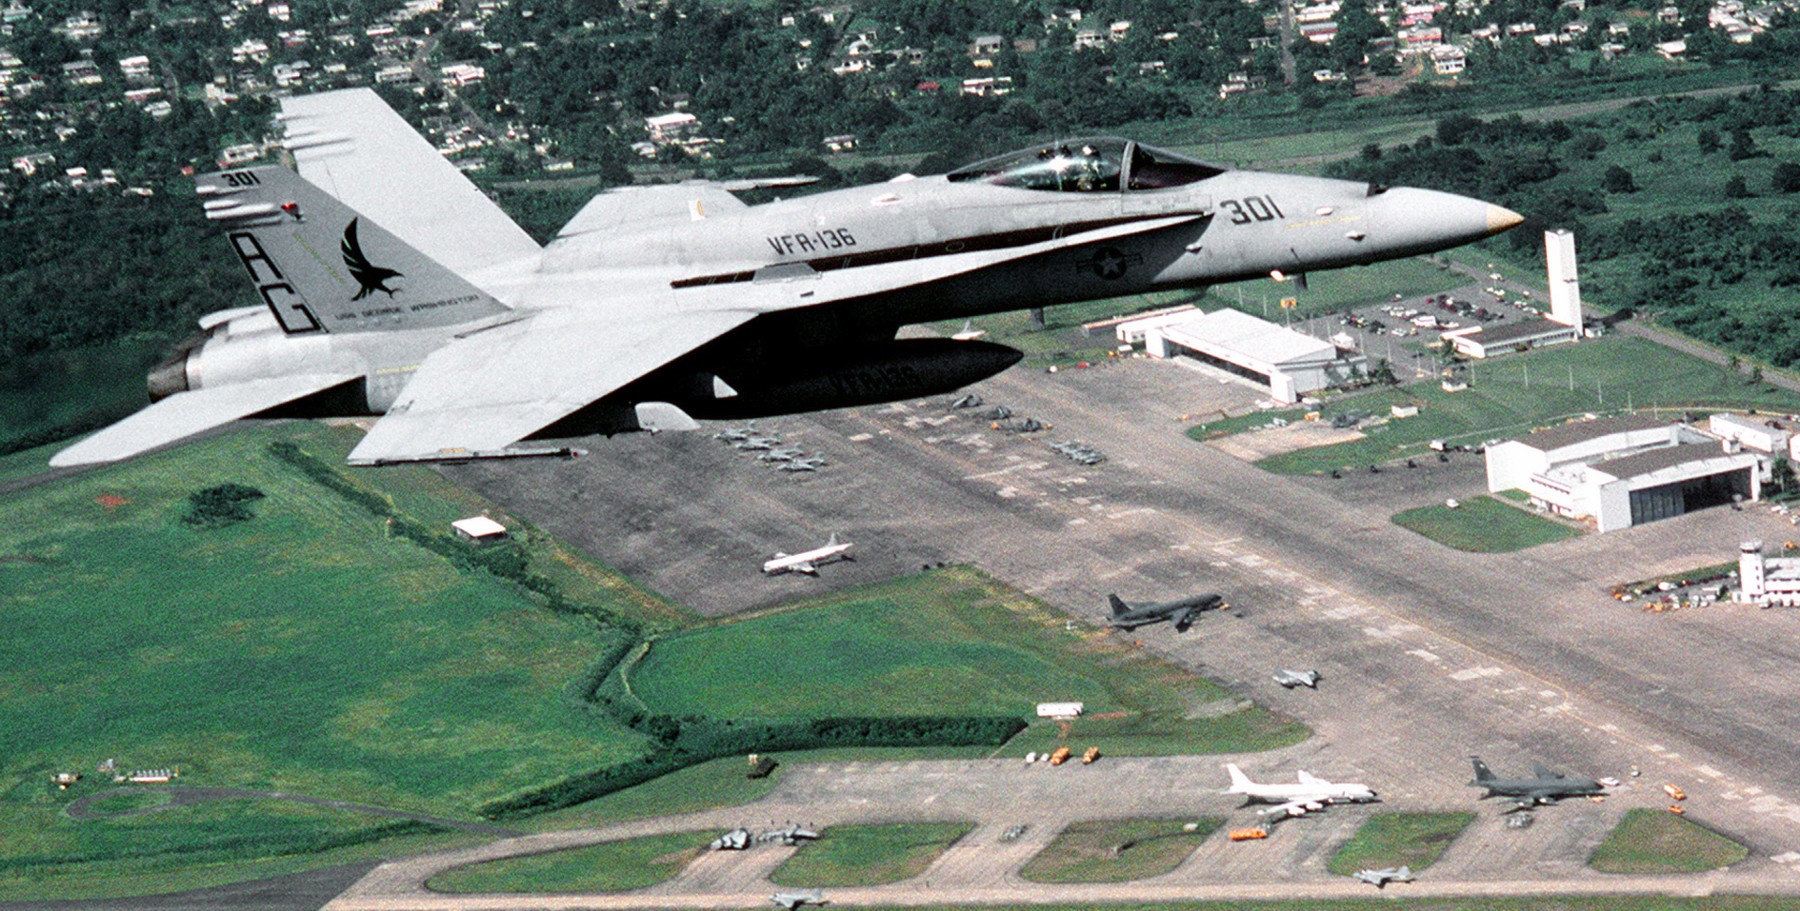 vfa-136 knighthawks strike fighter squadron f/a-18c hornet 1992 67 cvw-7 naval station roosevelt roads puerto rico